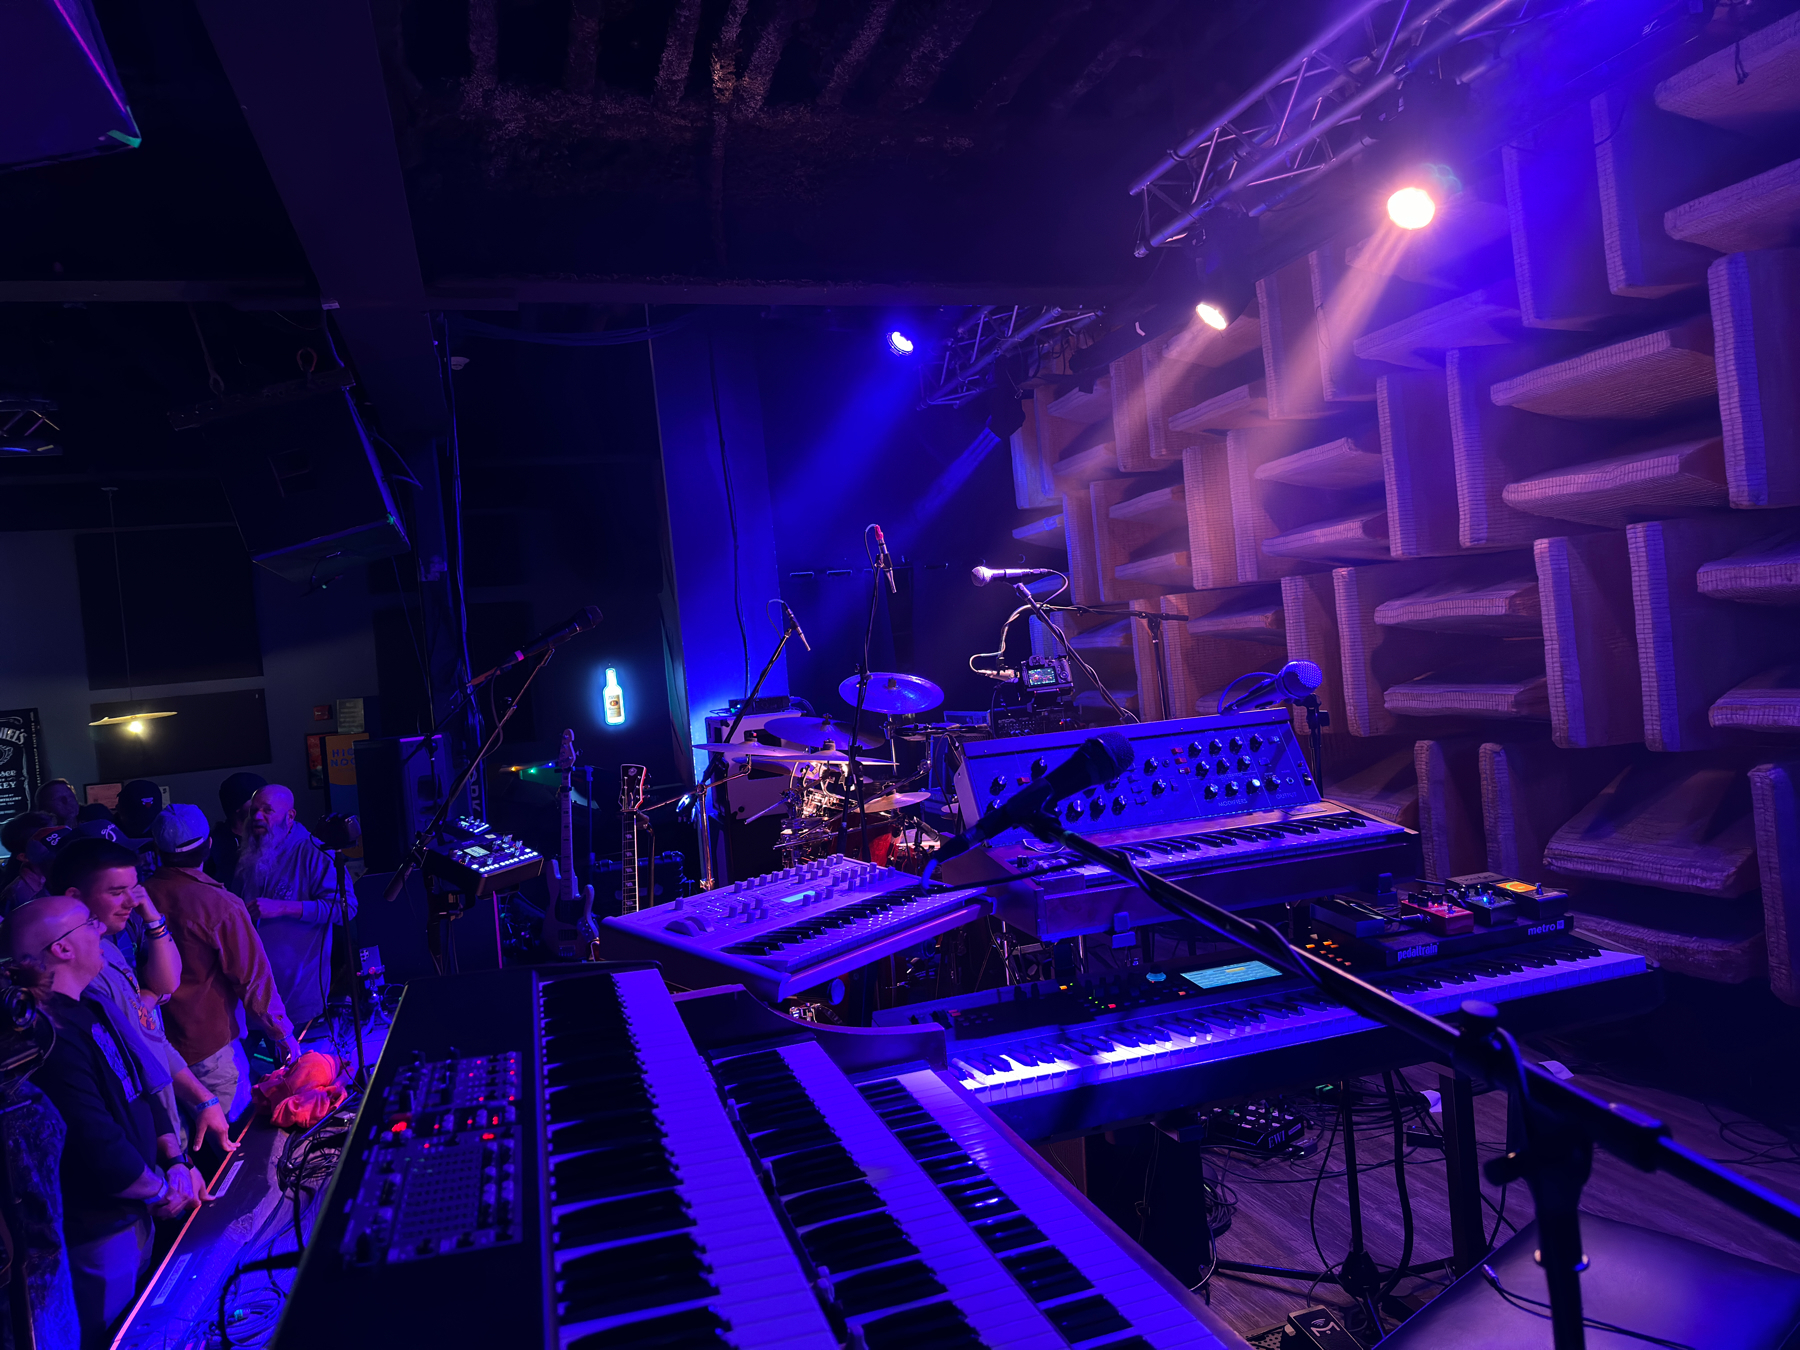 A music venue stage with various electronic keyboards and synthesizers set up for a performance. Audience members gather in anticipation. The stage is illuminated with blue stage lighting and features acoustic panels on the wall for sound dampening.